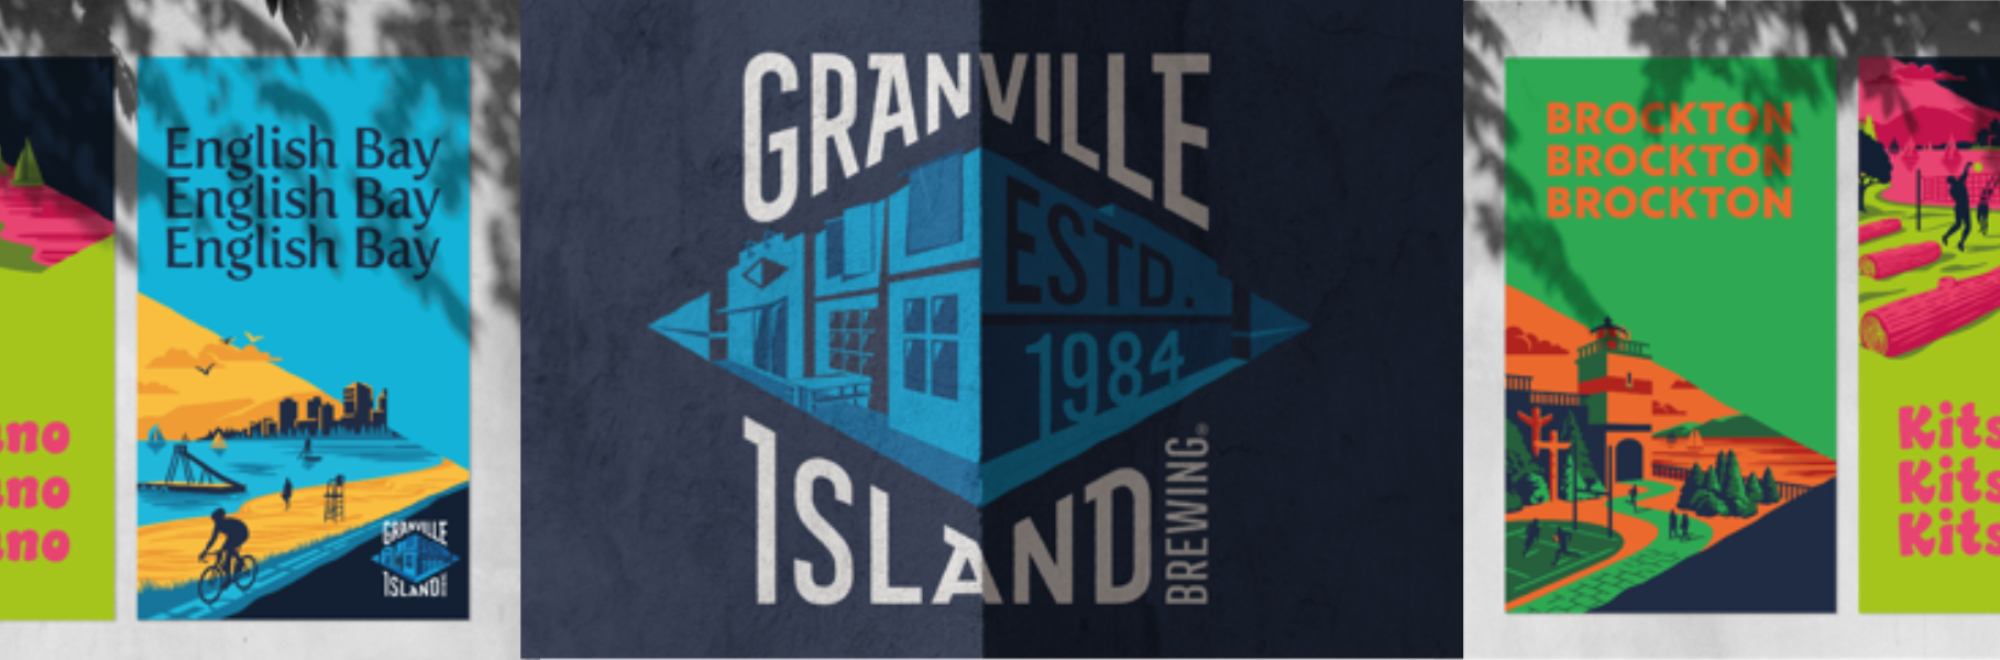 Granville Island Brewing's redesign aims to reflect the people of the province